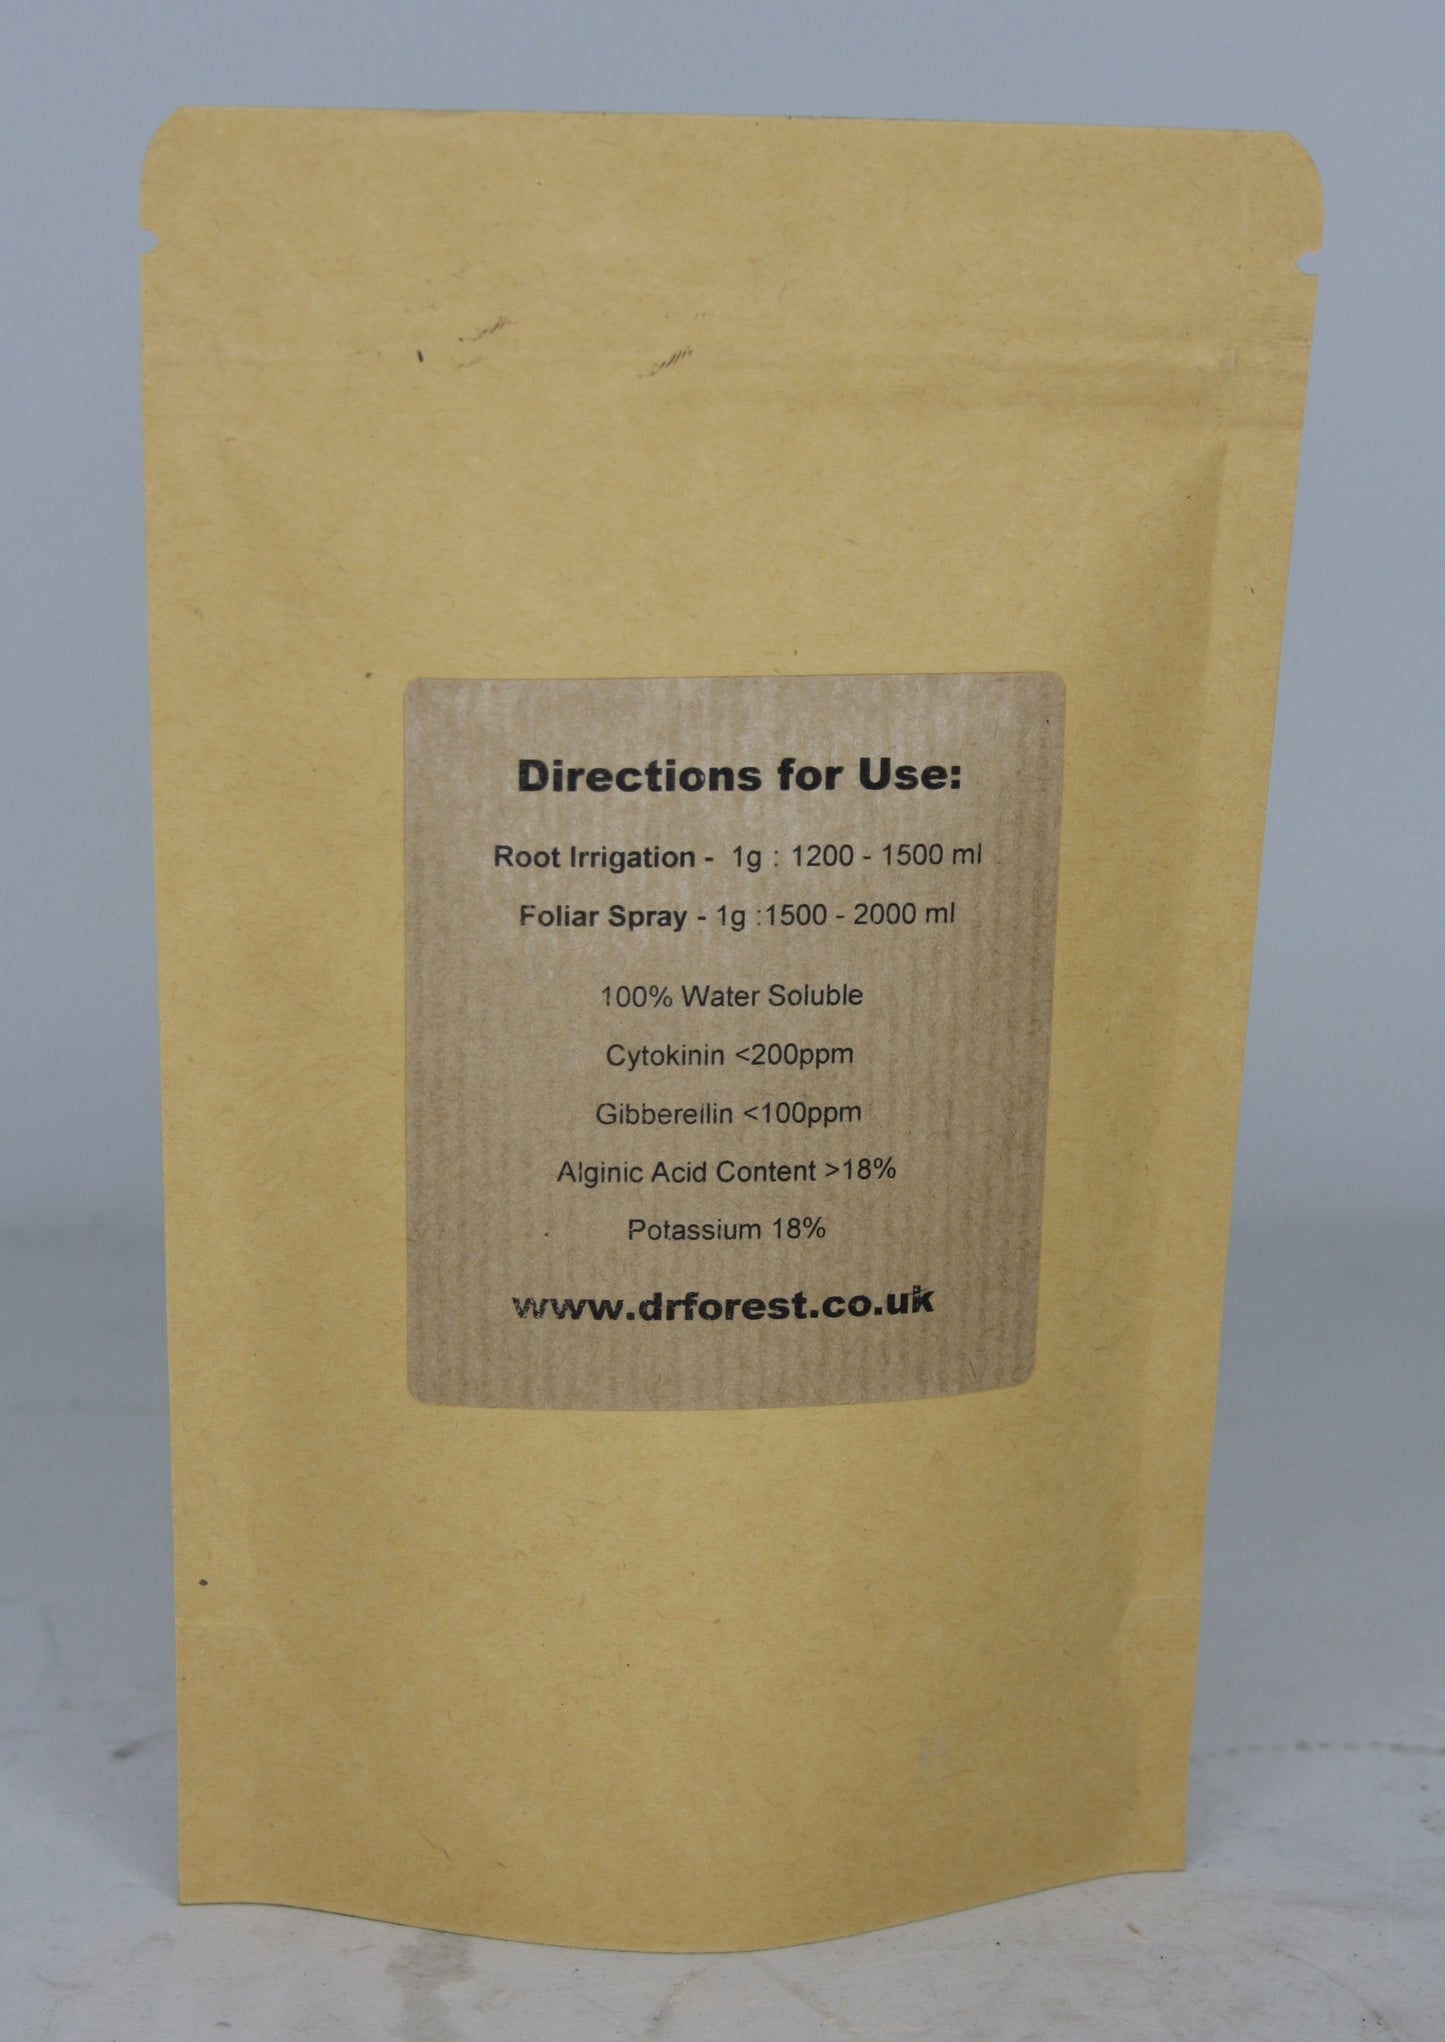 Soluble Seaweed Powder Dr Forest